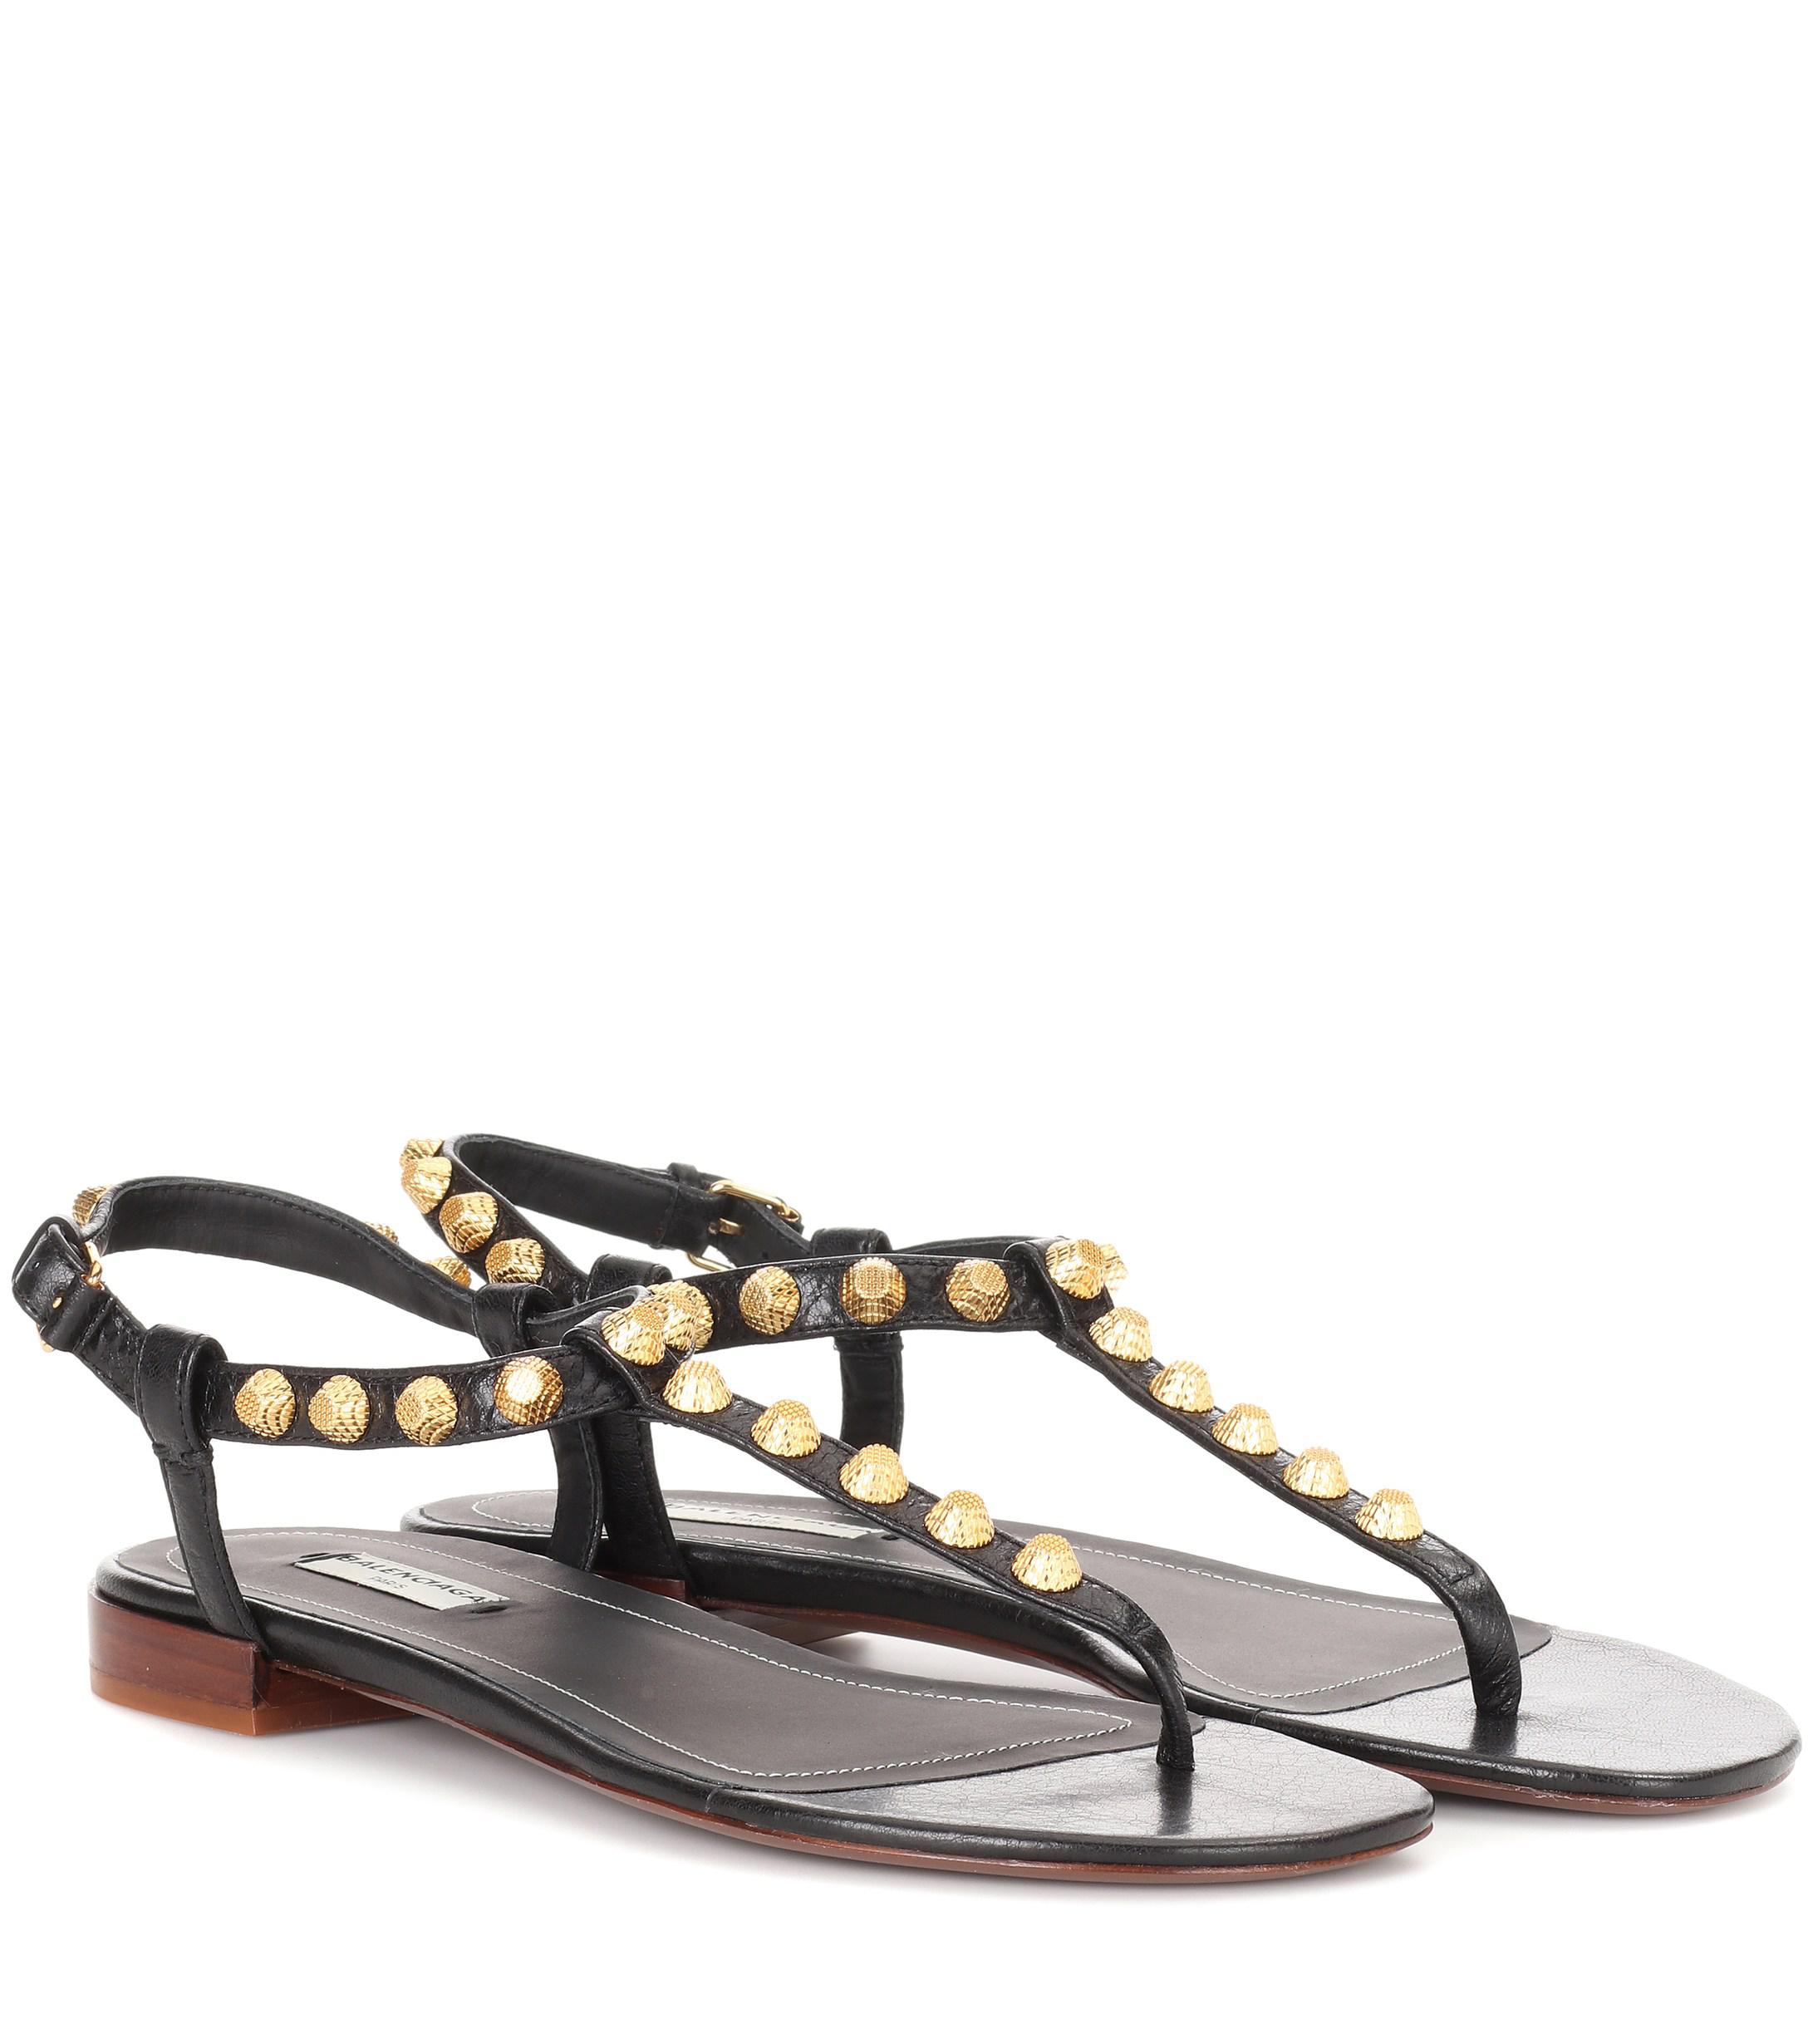 Balenciaga Giant Studded Leather Sandals in Black - Lyst